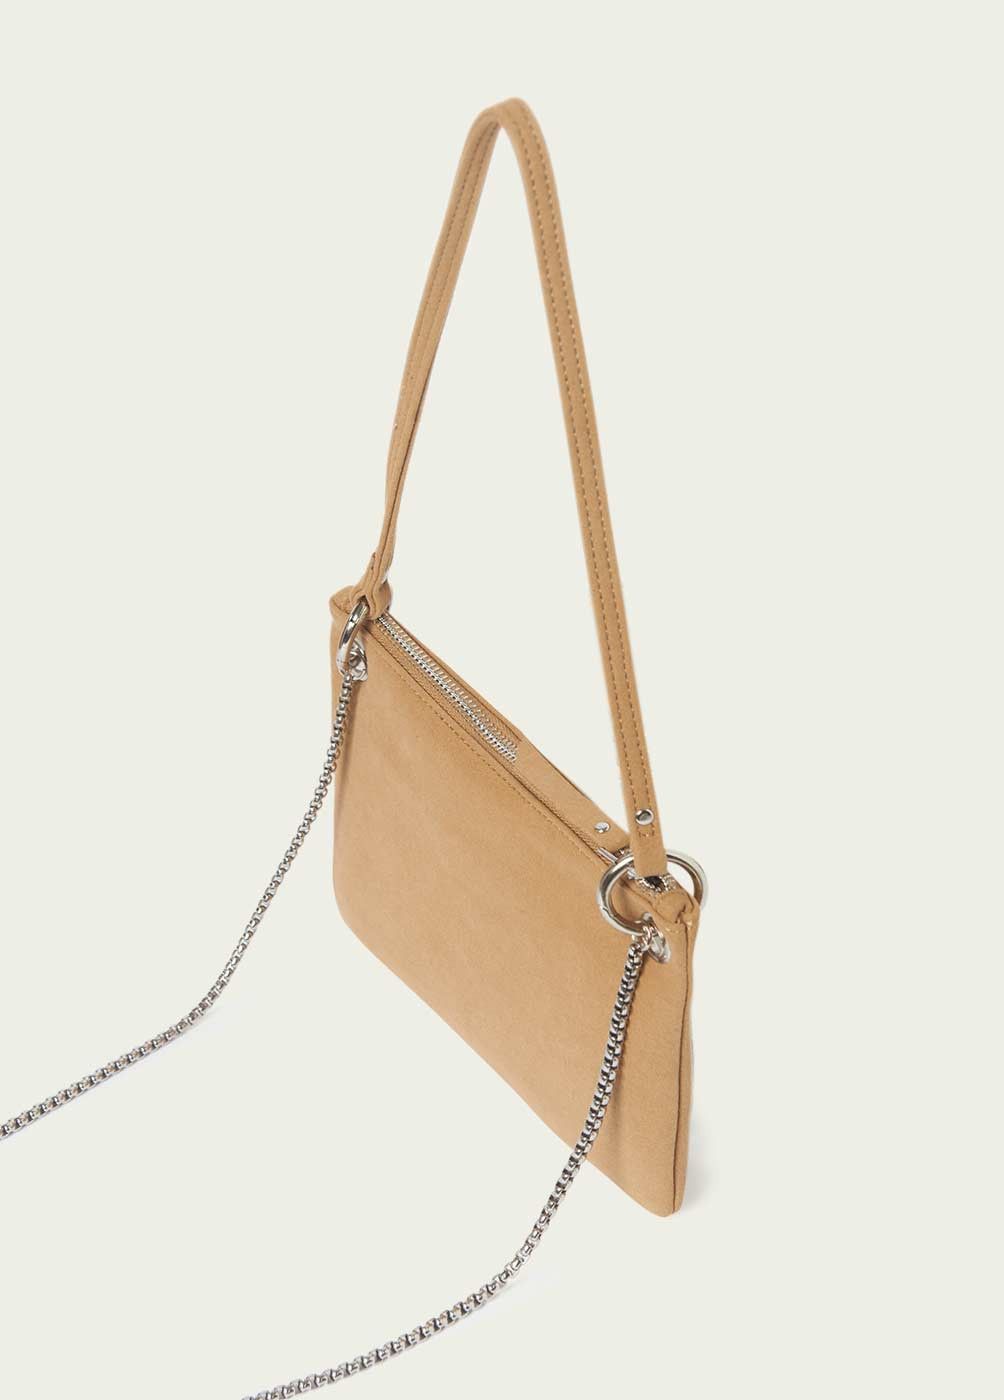 SMALL BAG WITH RING DETAILS